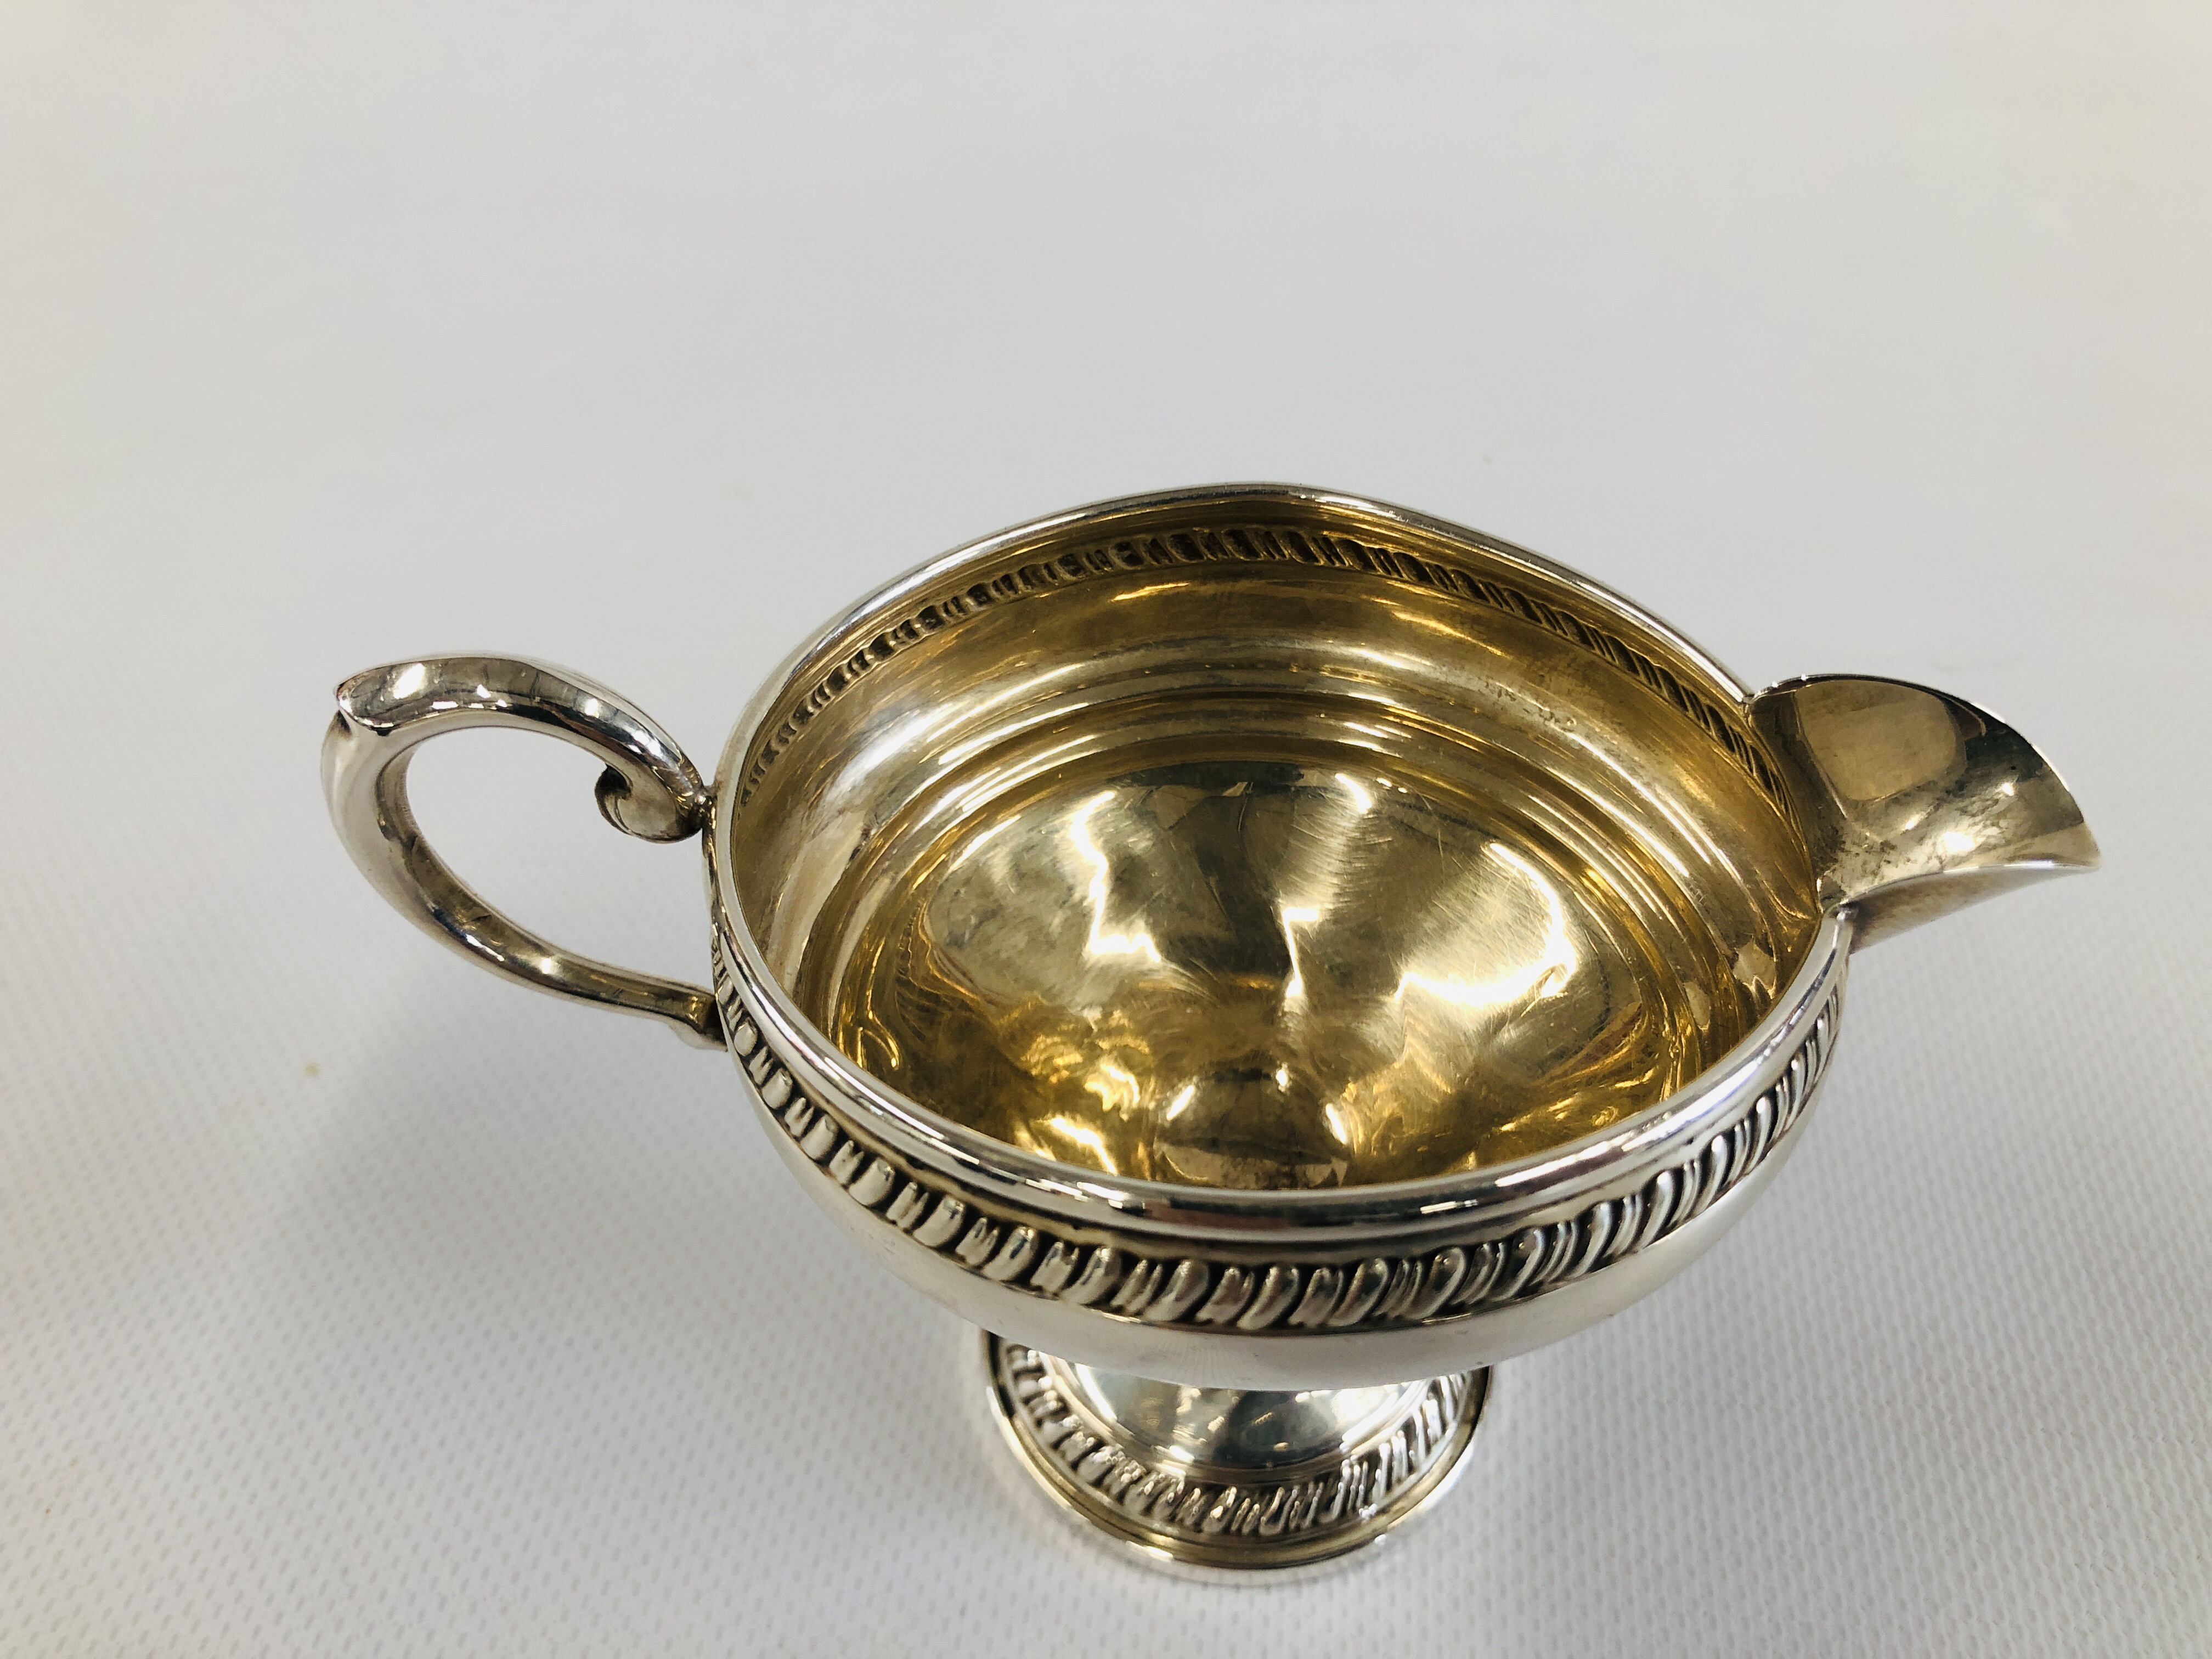 A DECORATIVE CREAM JUG AND MATCHING TWO HANDLED SUGAR BOWL MARKED "CROWN" STERLING. - Image 11 of 13